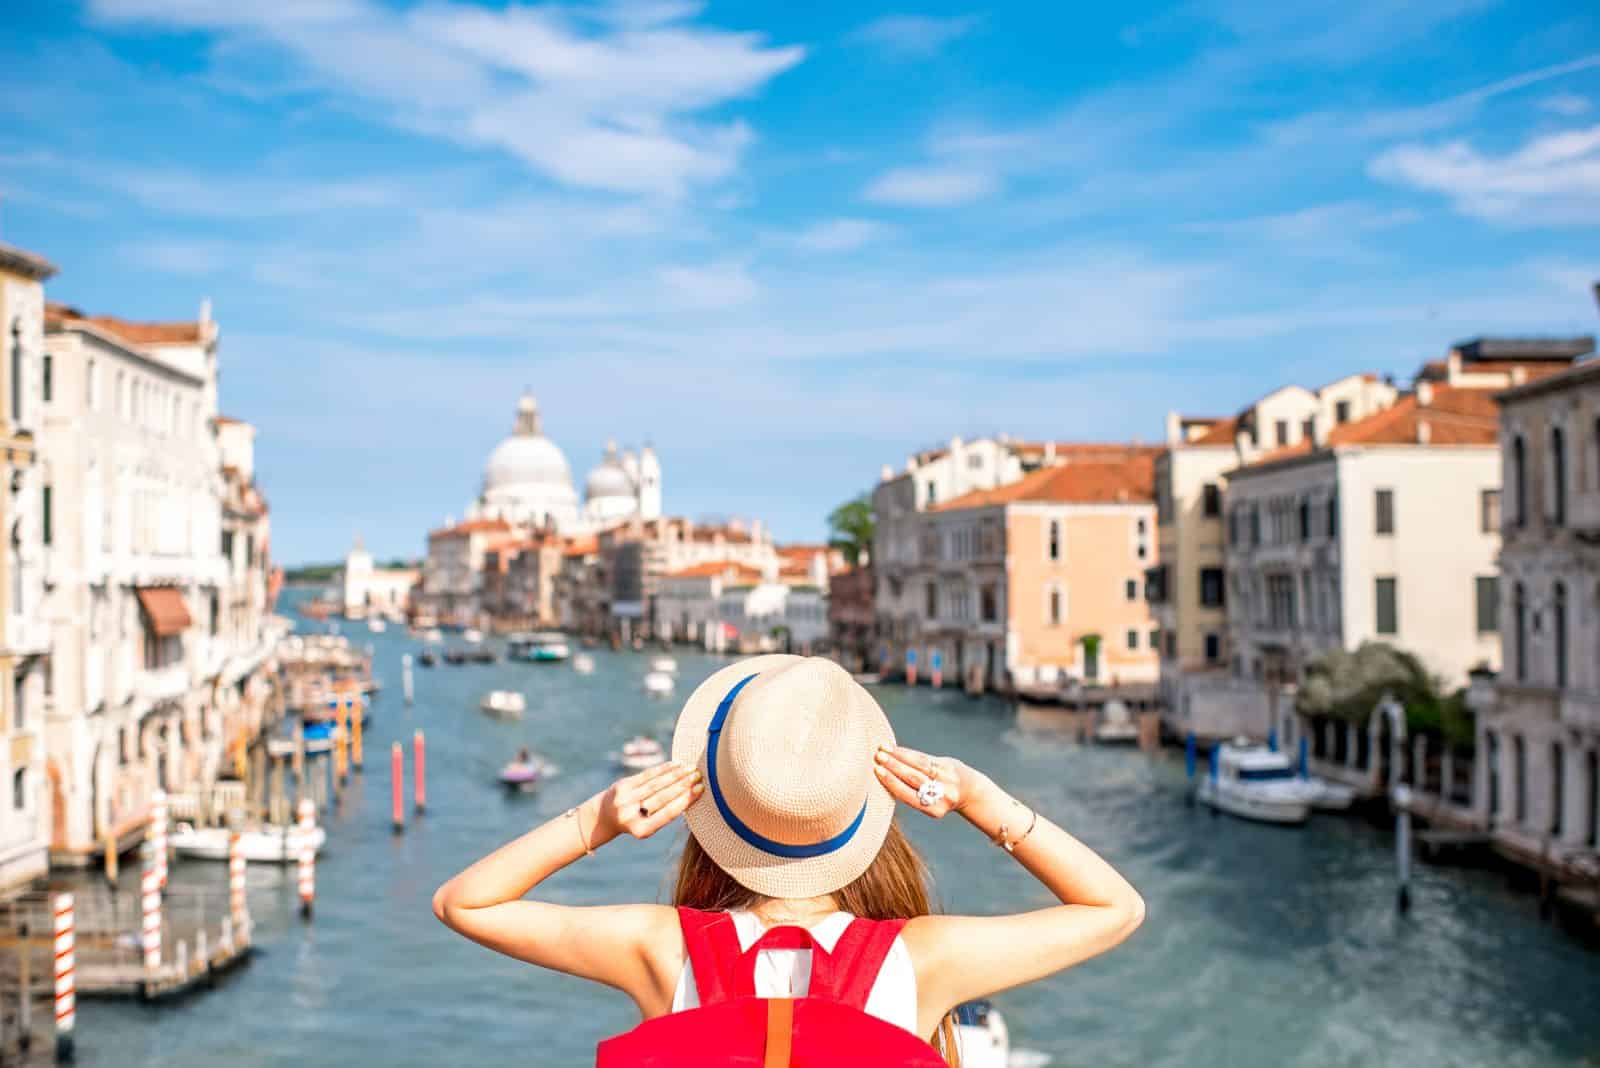 Image Credit: Shutterstock / RossHelen <p><span>On April 25, the historic Italian city of Venice became the first city in the world to charge an entry fee for day-tripping visitors. The move has sparked approval from some and outrage in others. </span></p>